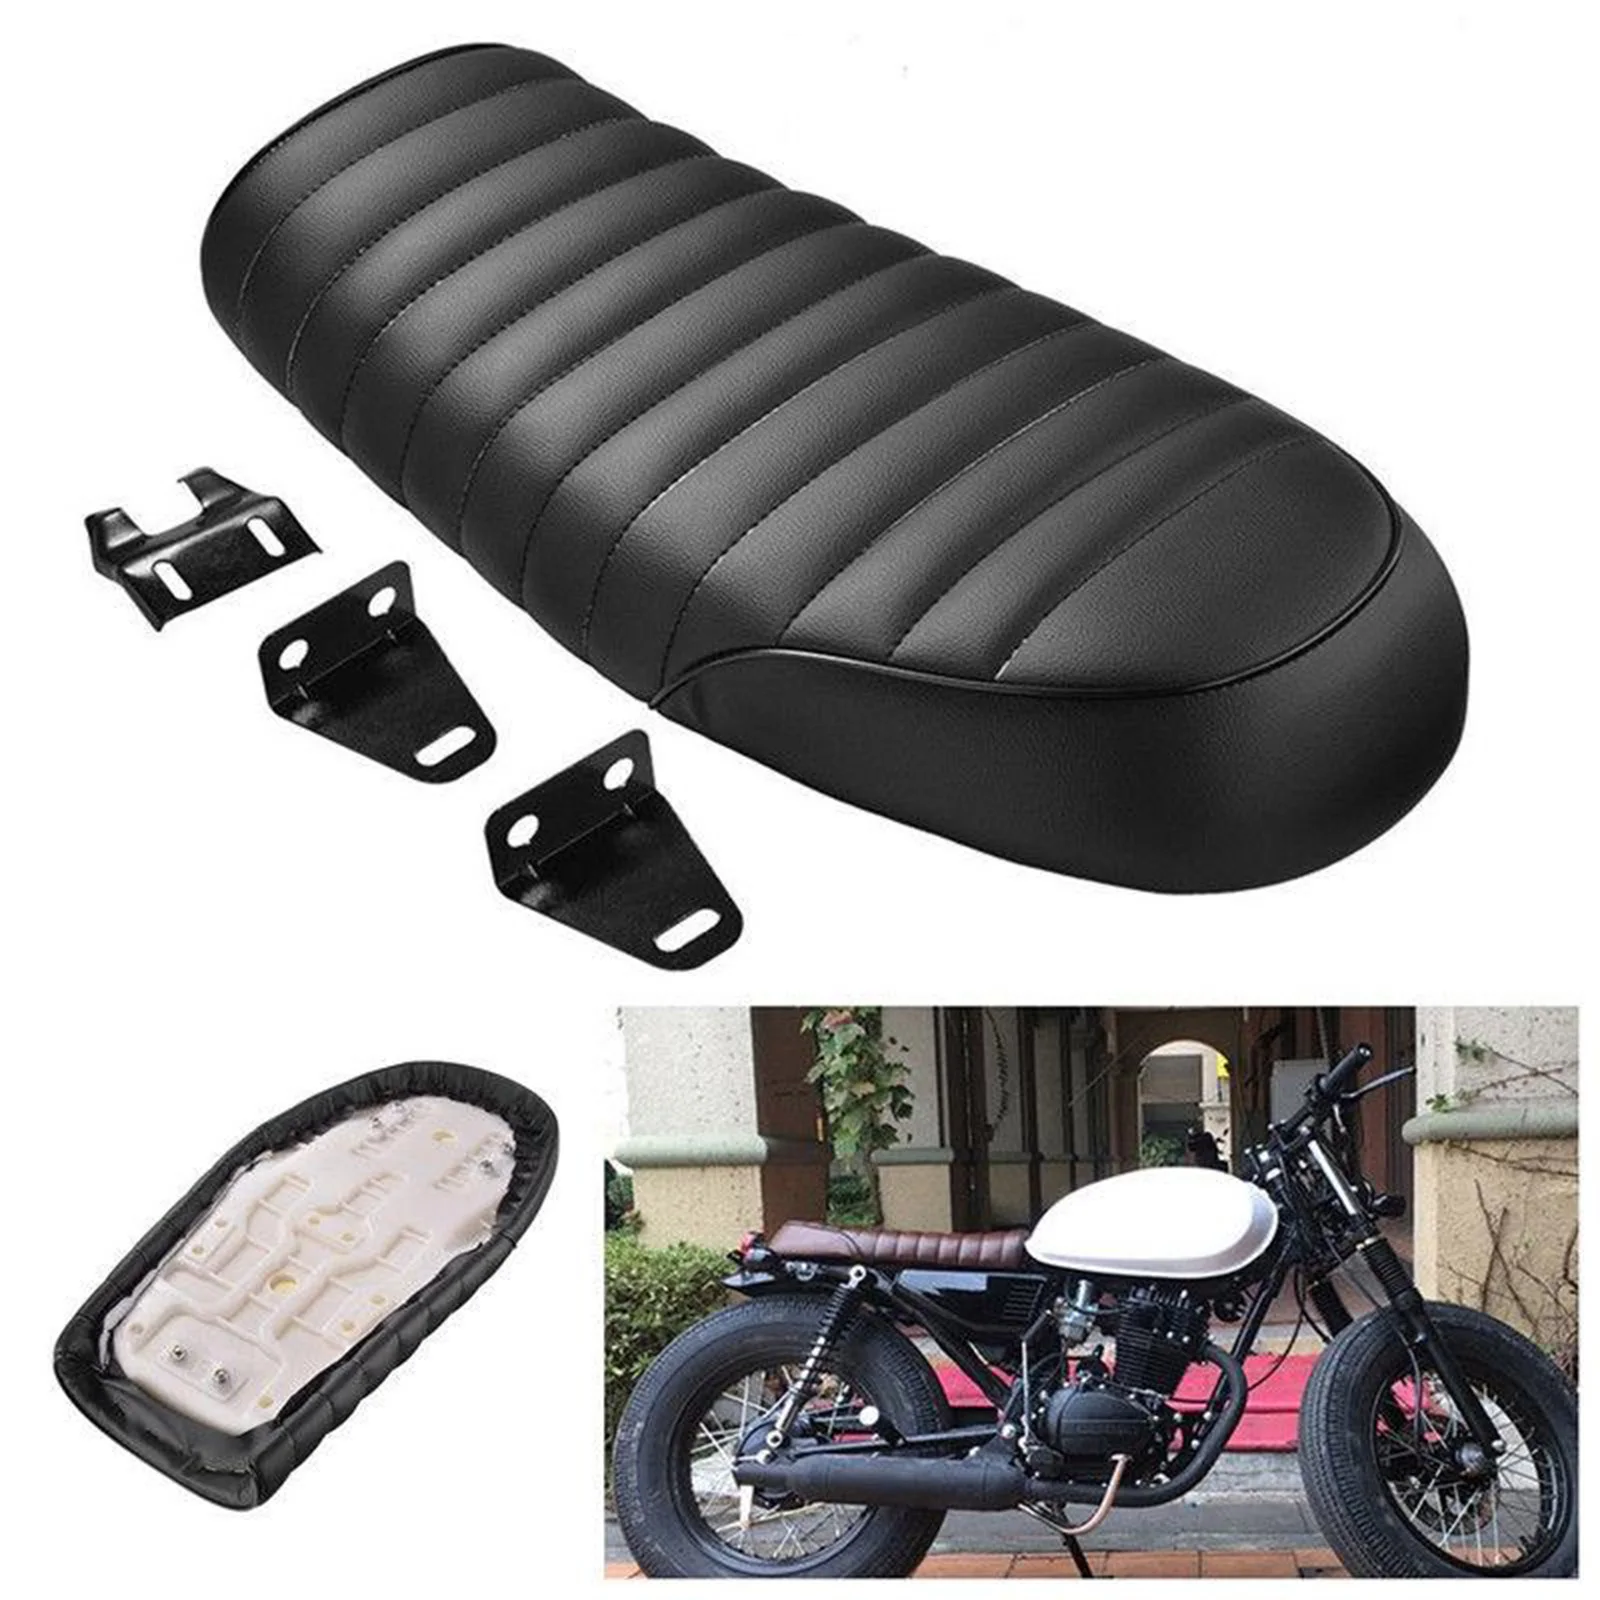 Cafe Racer Seat - Motorcycle Equipments & Parts - AliExpress